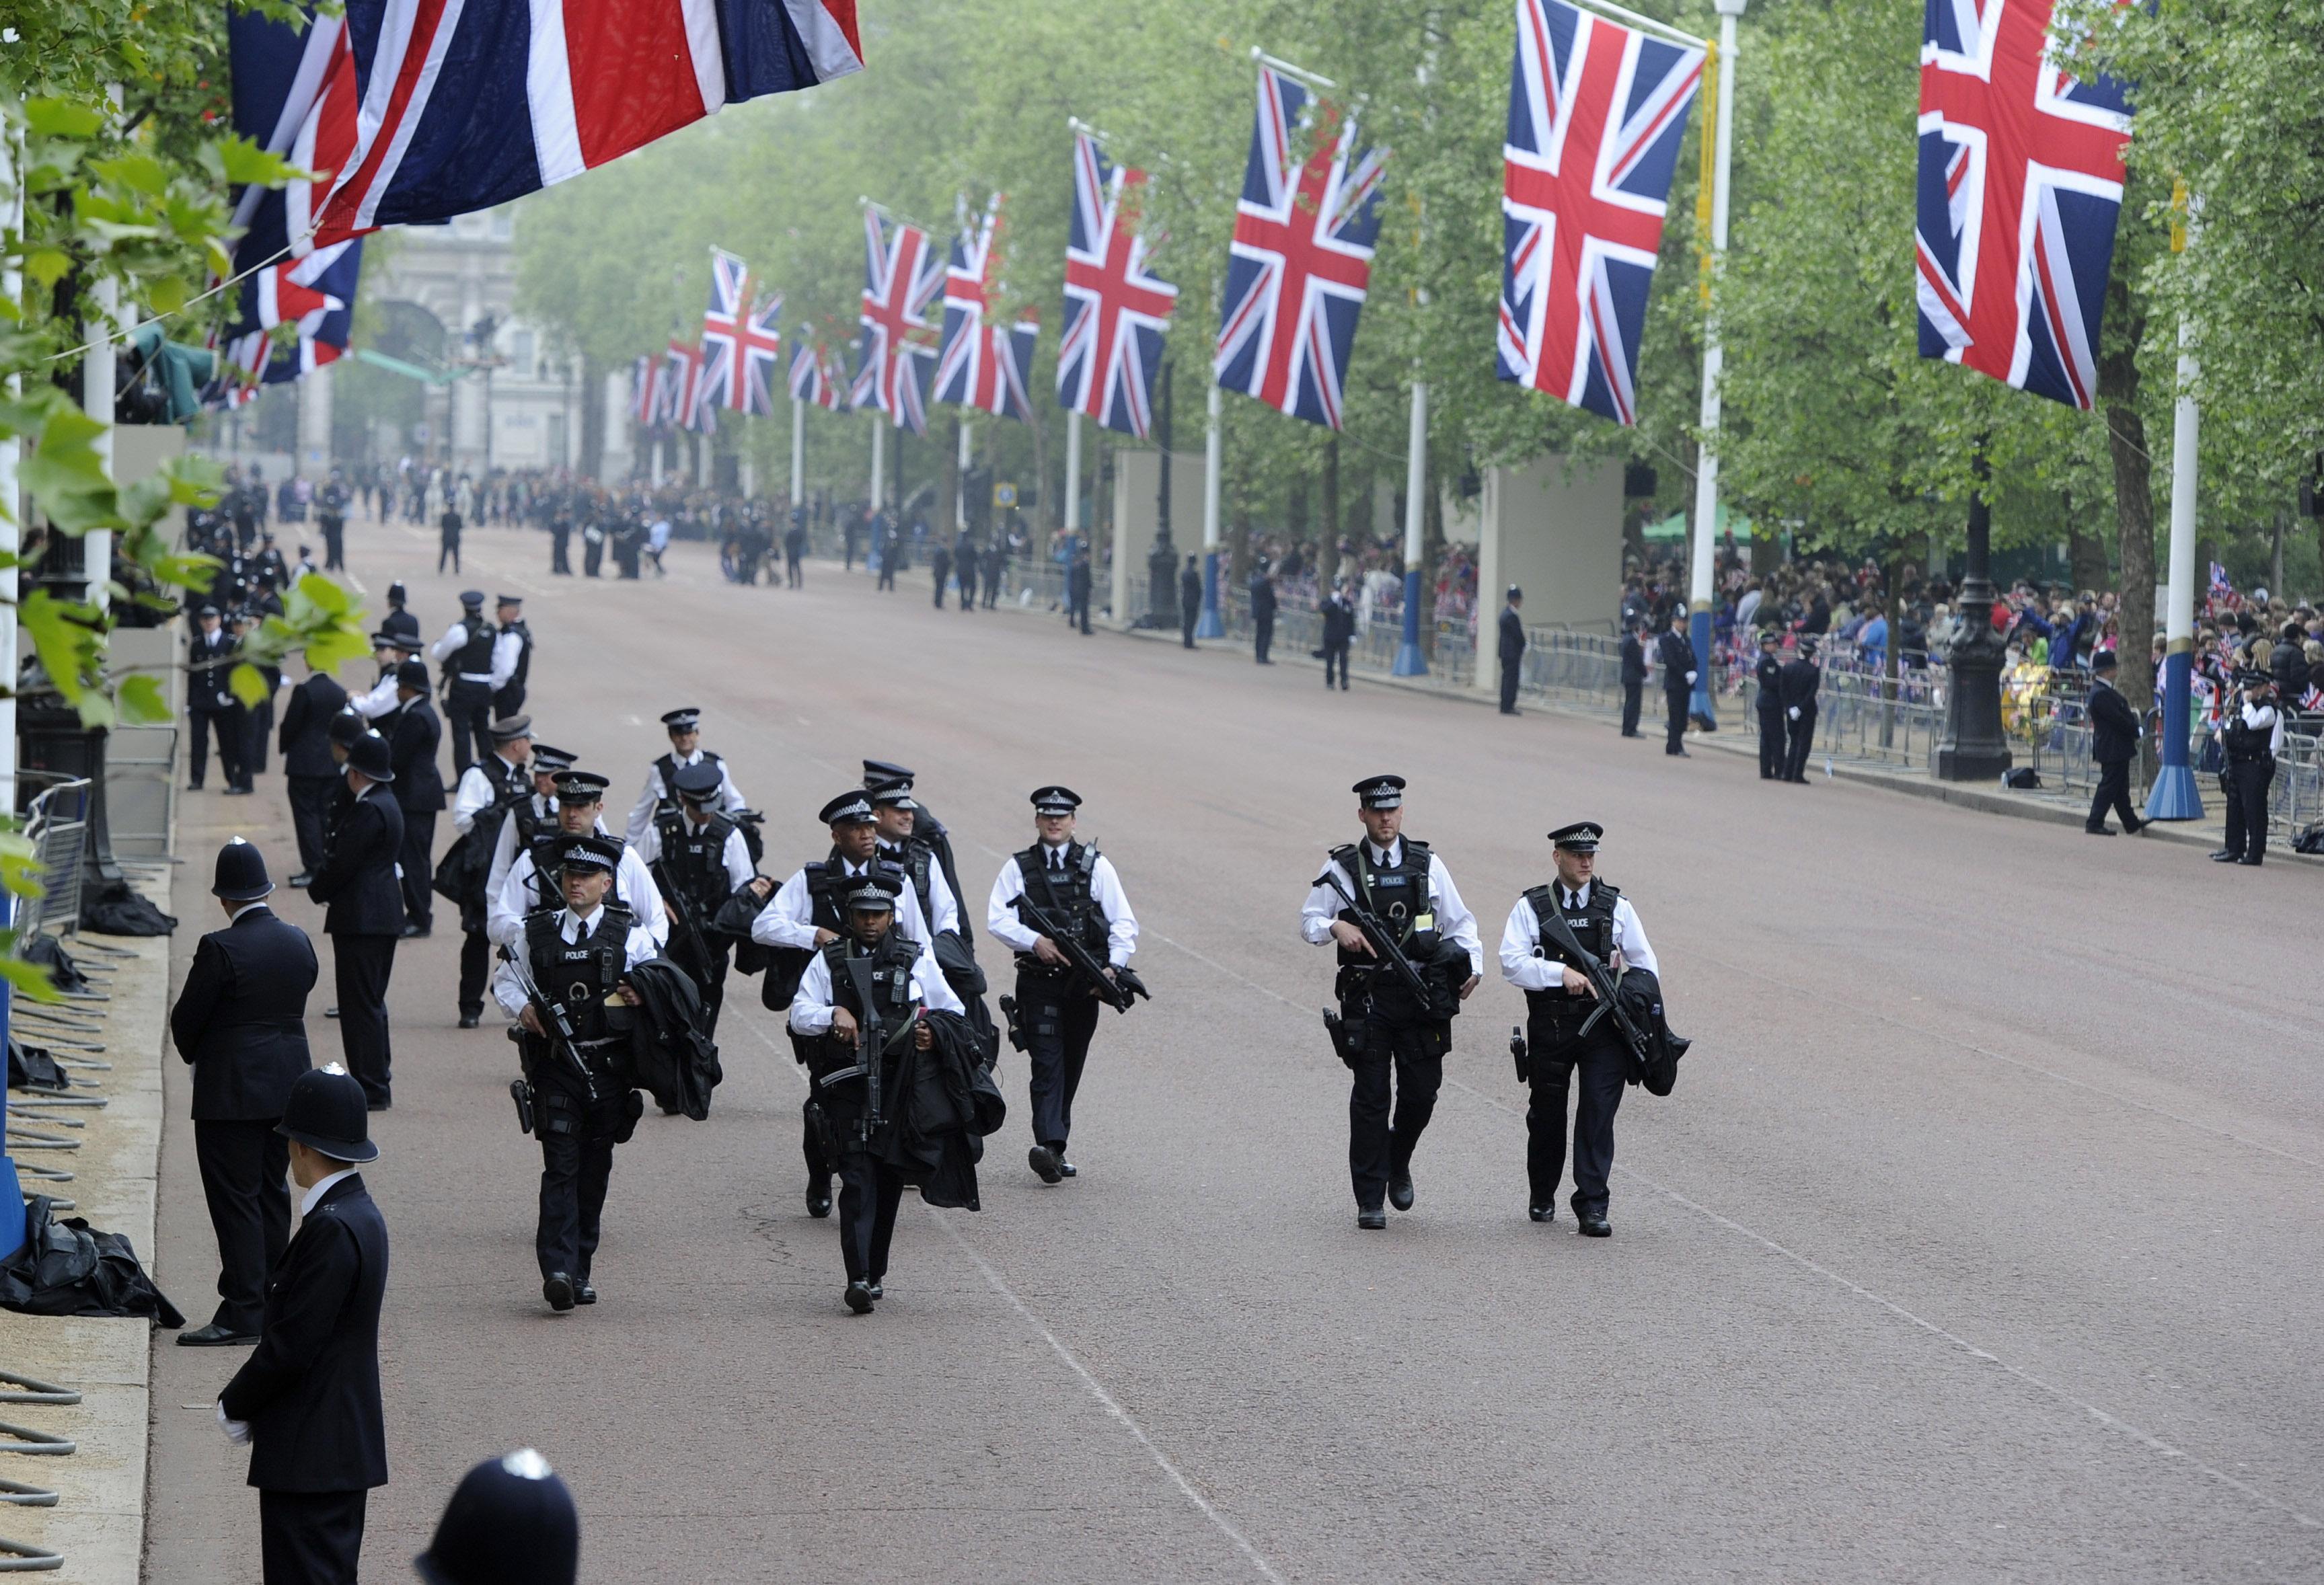 Heavy security at the royal wedding